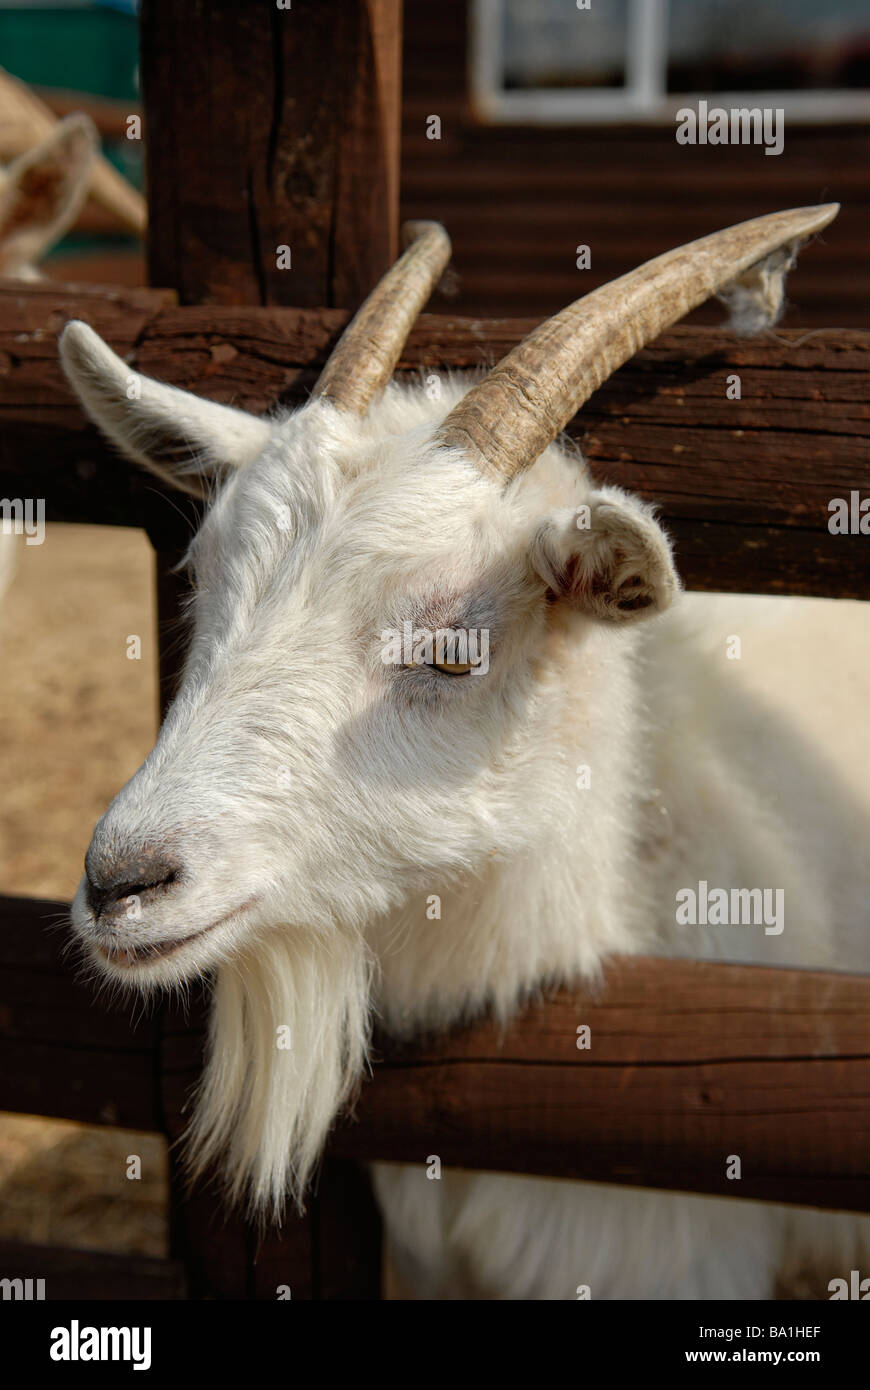 white goat with horns Stock Photo